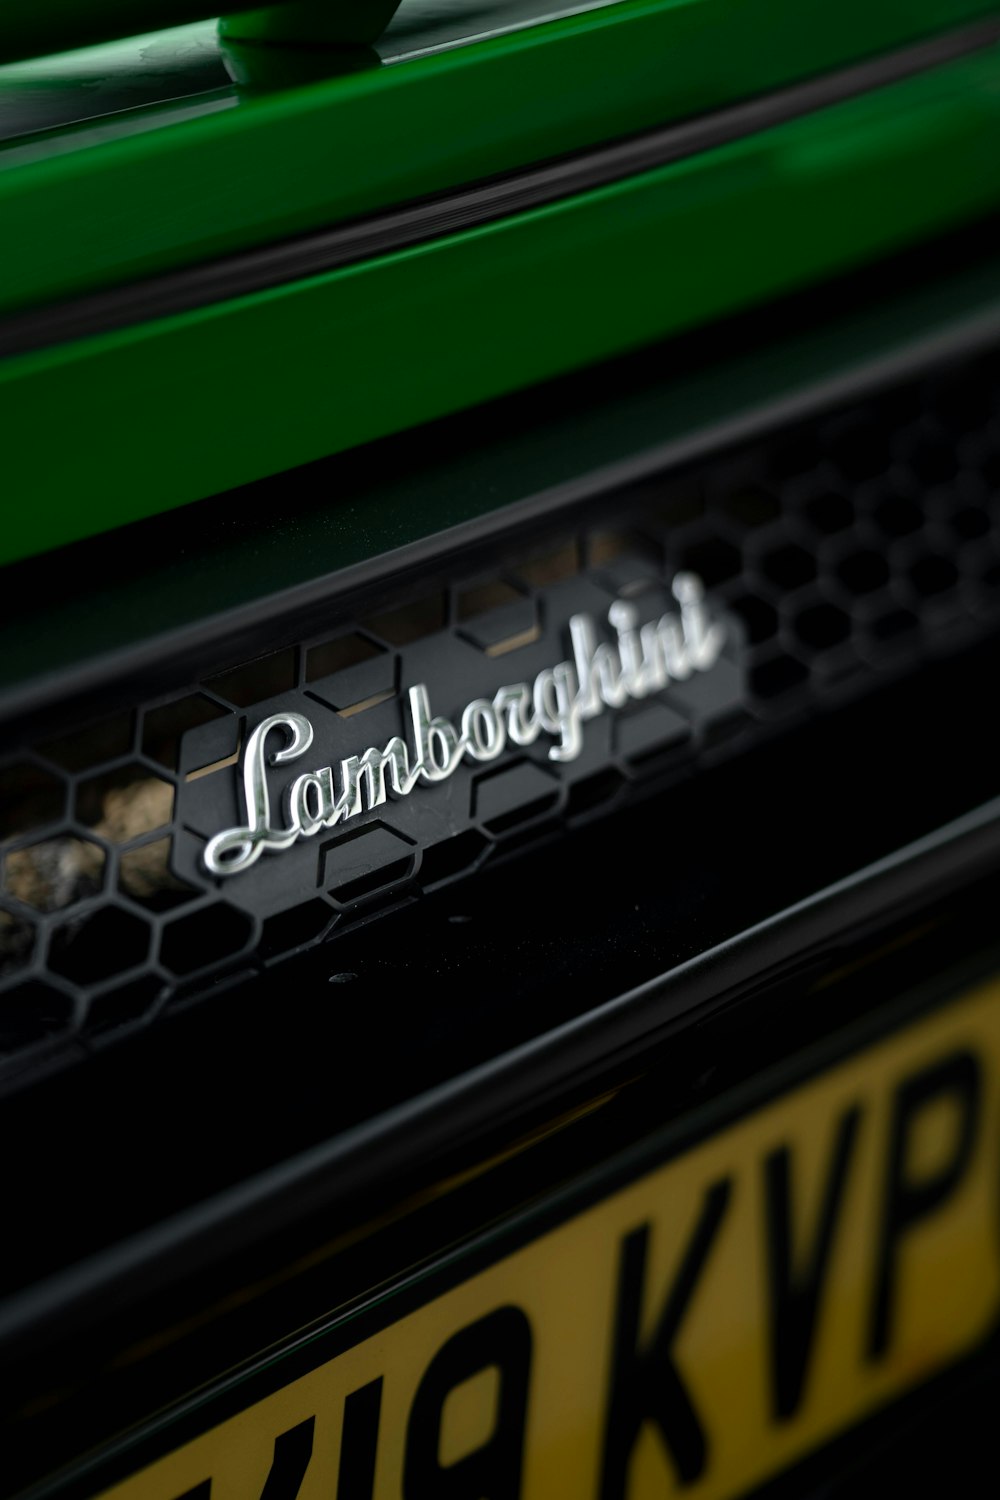 the emblem on the front of a green vehicle